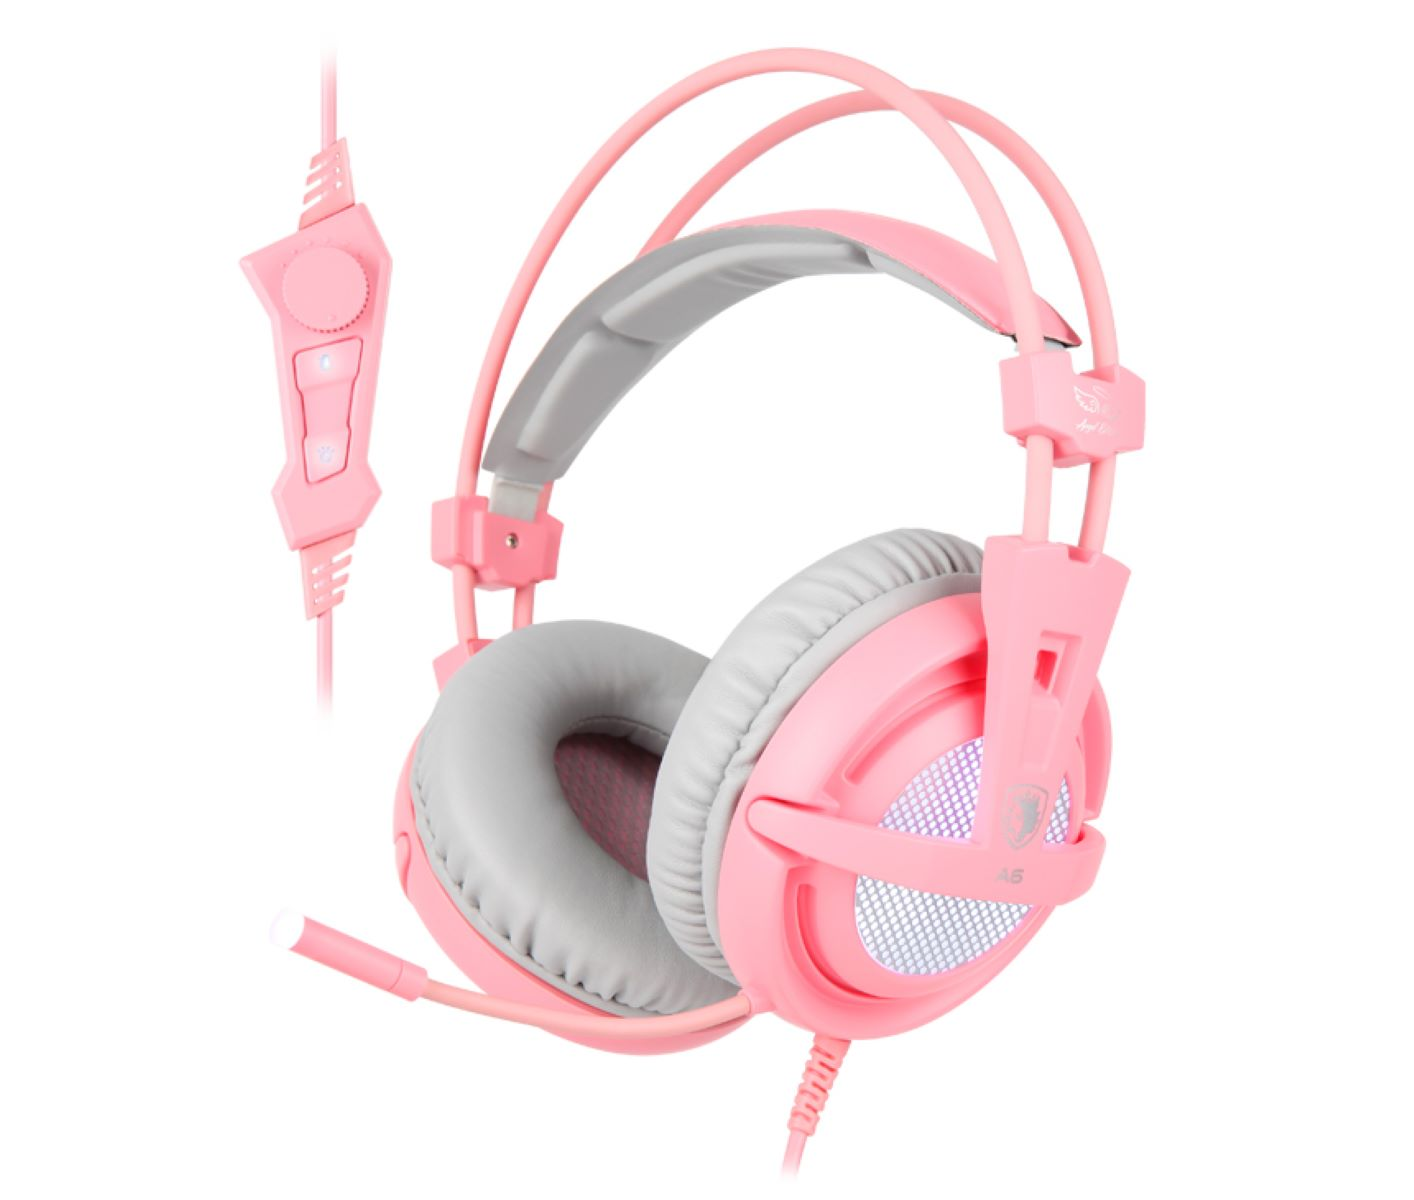 Headset SADES A6, Over-ear pink/weiß Gaming